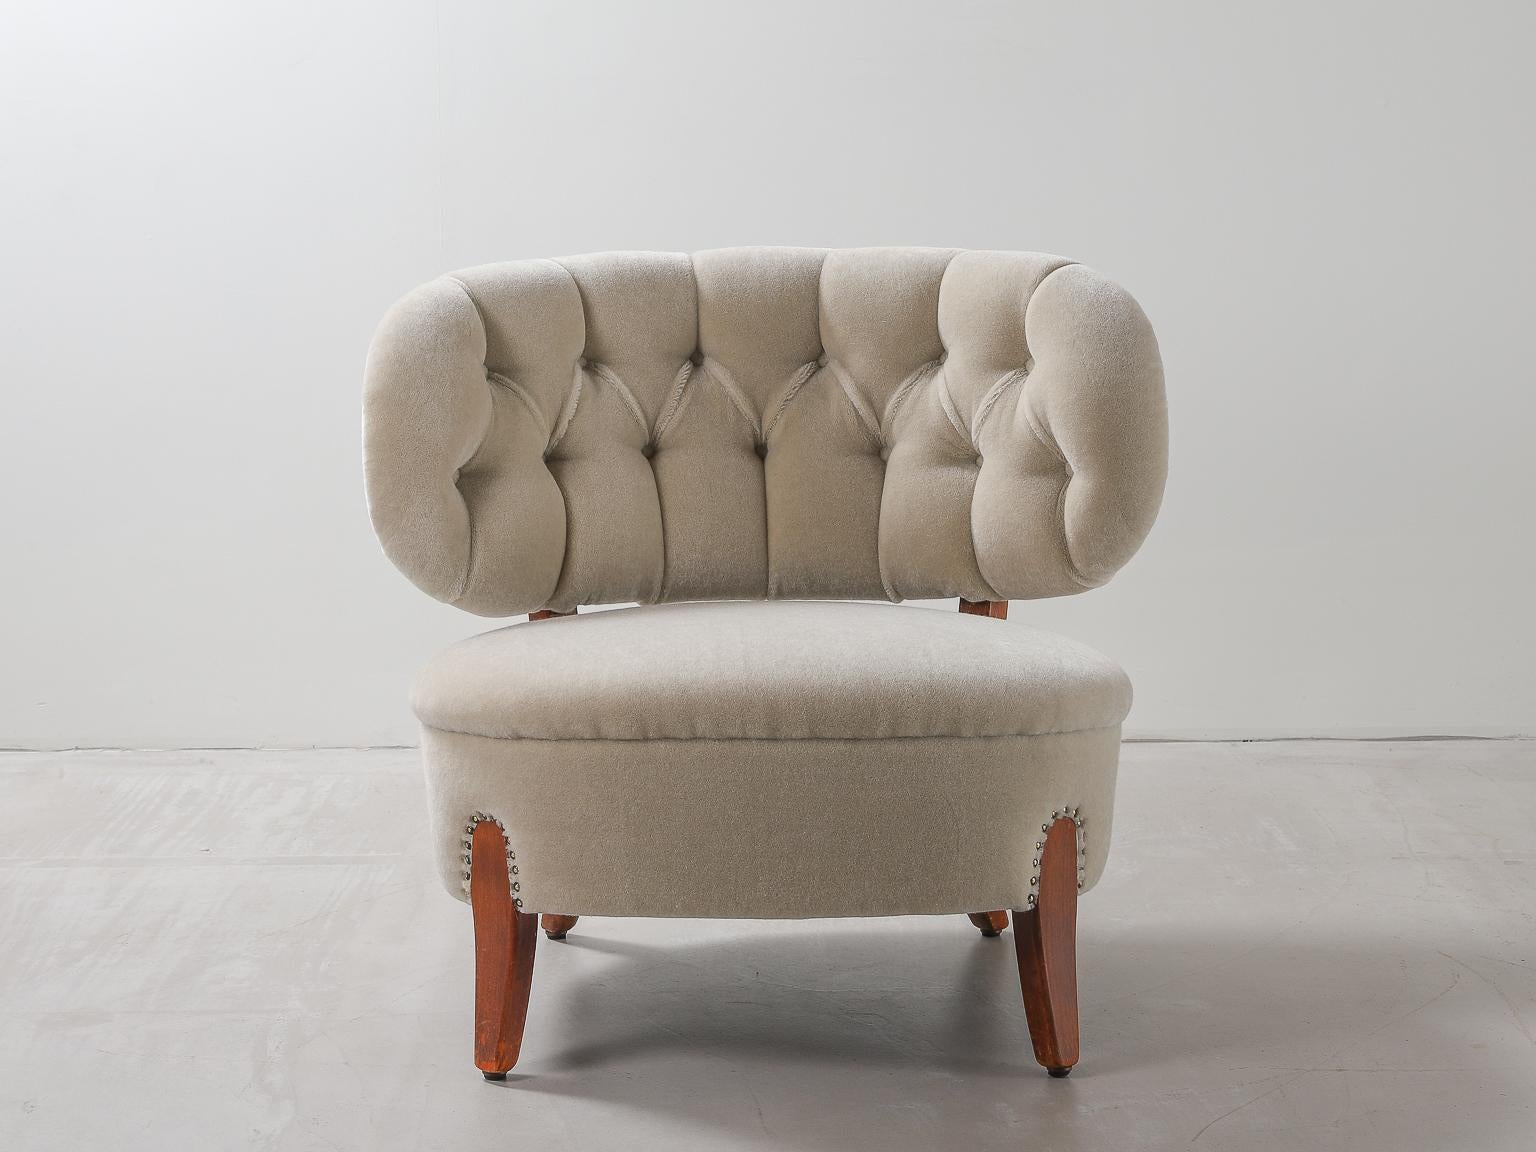 The lounge chair designed by Otto Schulz in 1936 & manufactured from the 1940s. Newly upholstered in bespoke mohair velvet bespoke by Thurstan with deep button back details & antique brass ball studs.

Otto Schulz (1882-1970)
Schulz was born in